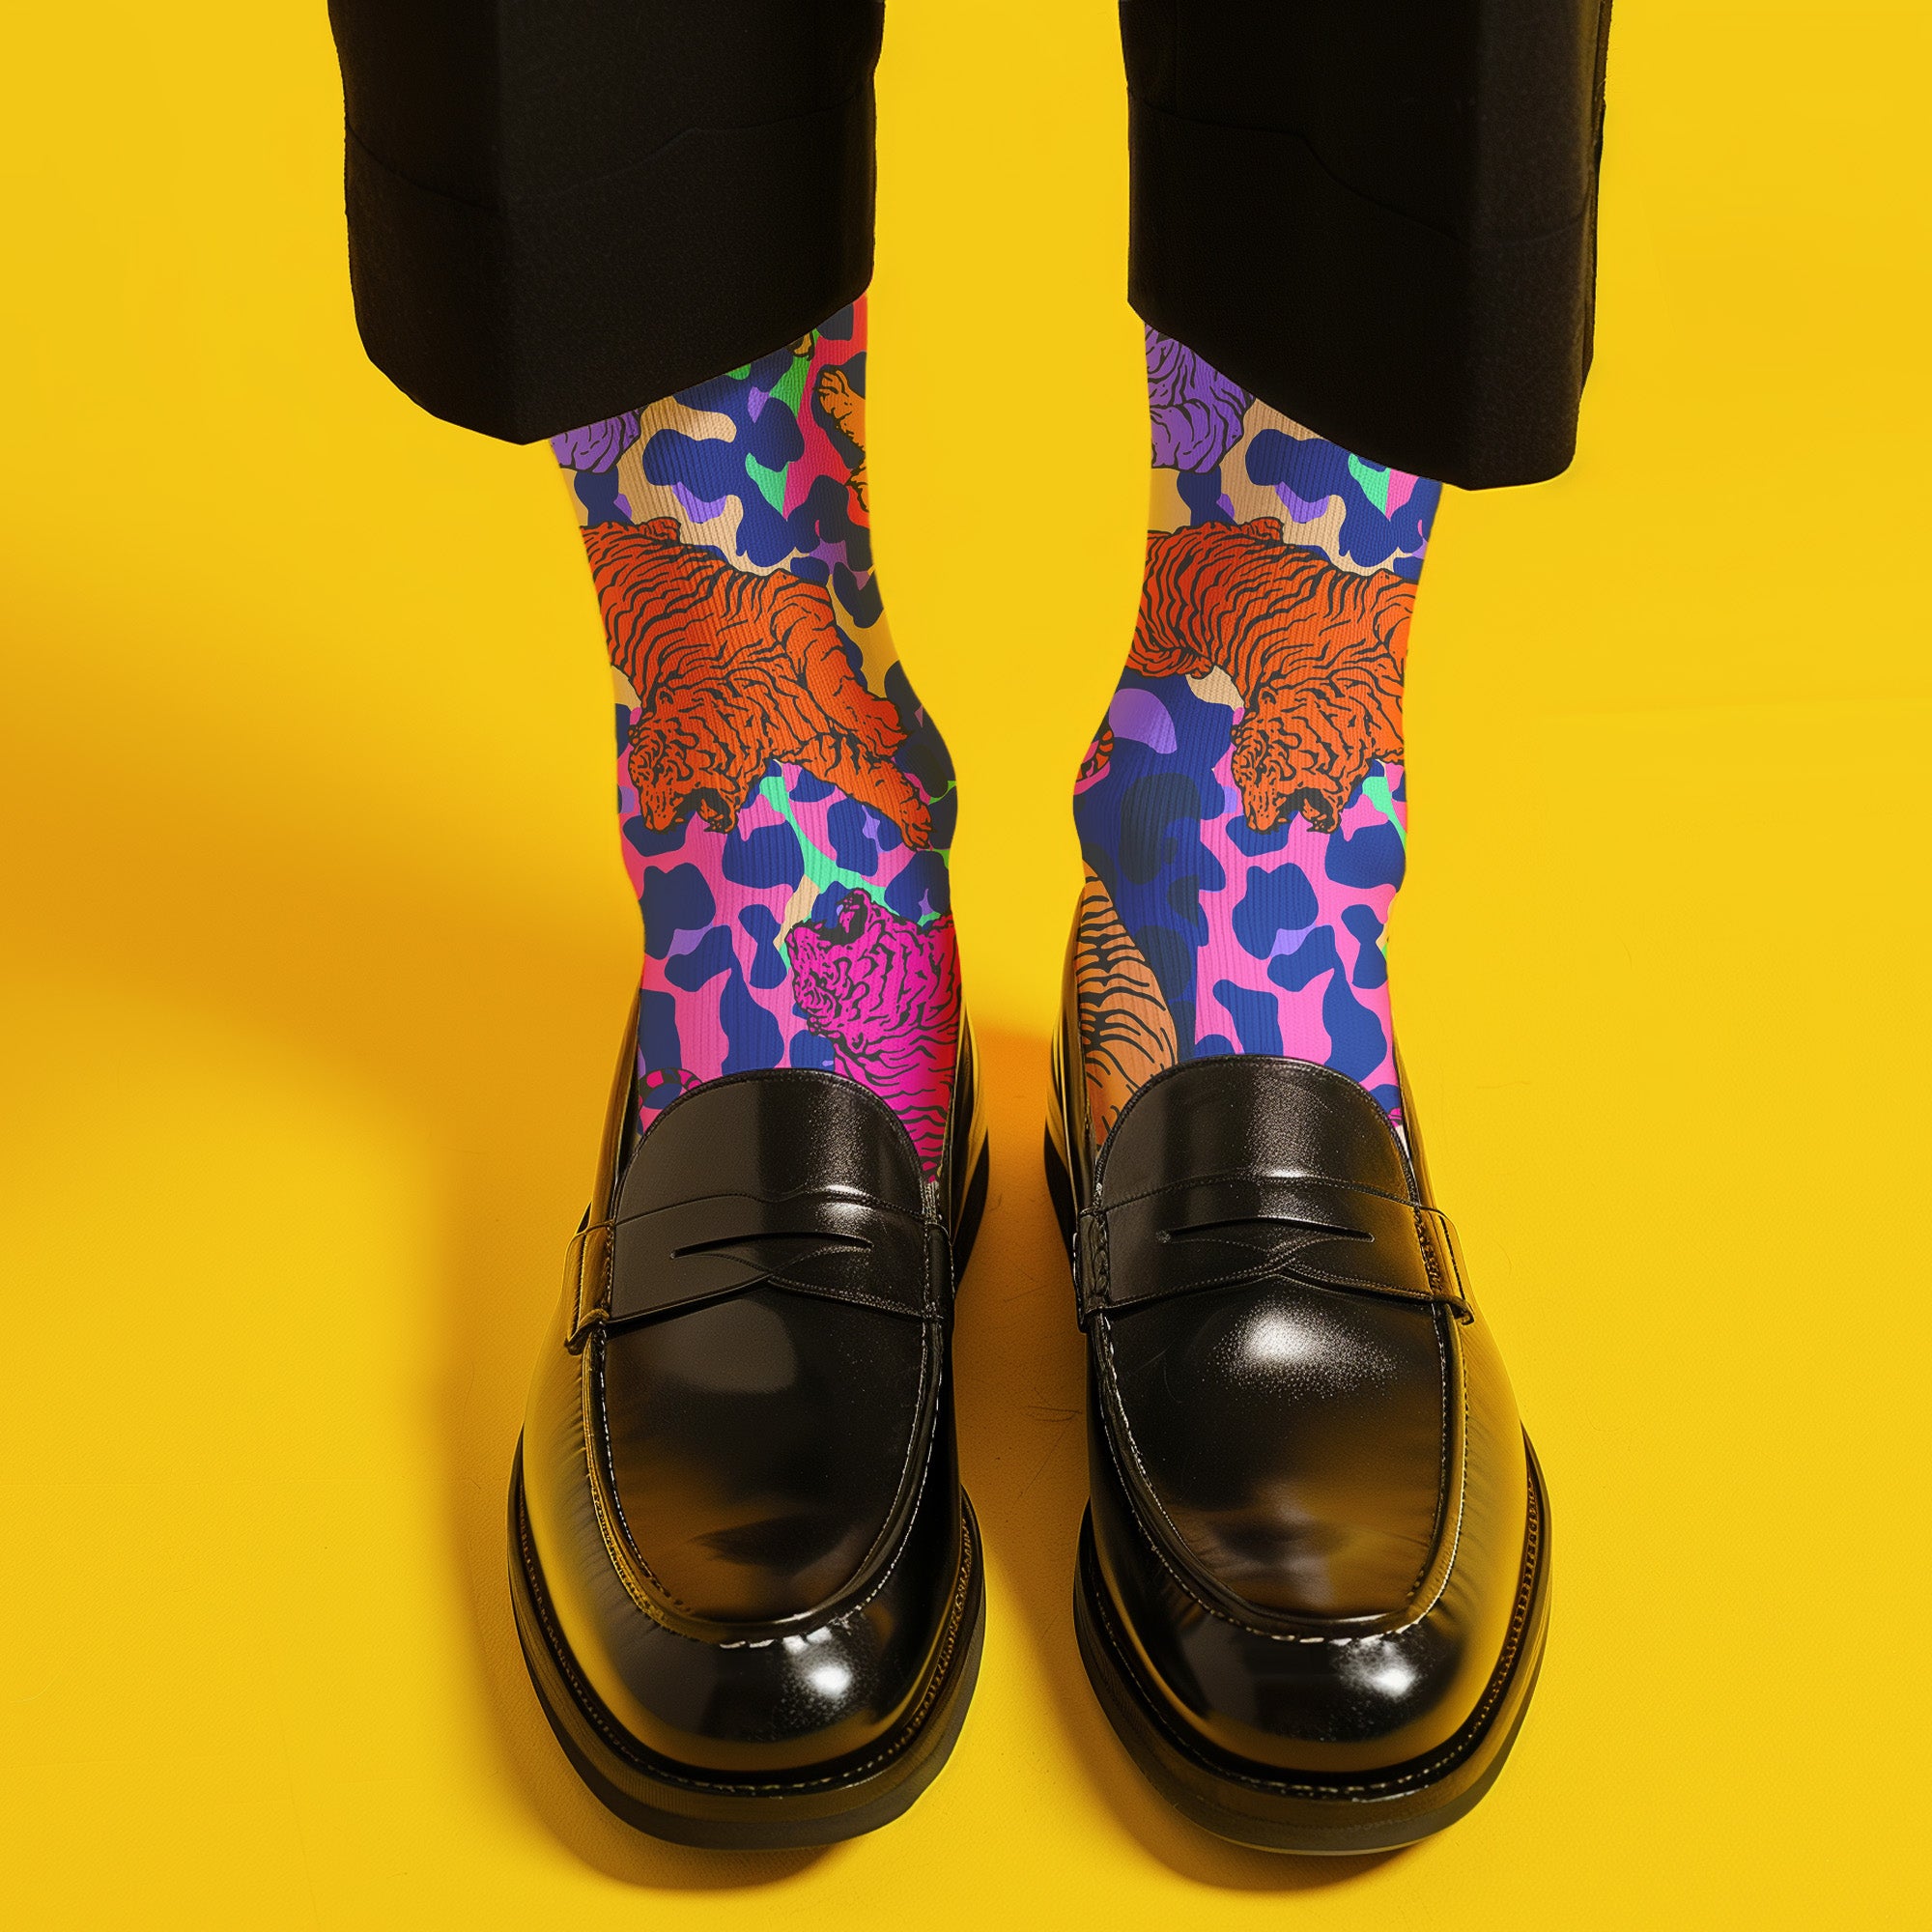 Stylish jungle-themed socks with tigers and abstract camo patterns in a palette of purple, blue, and pink, laid out on a yellow background, ideal for adding a pop of color to your wardrobe